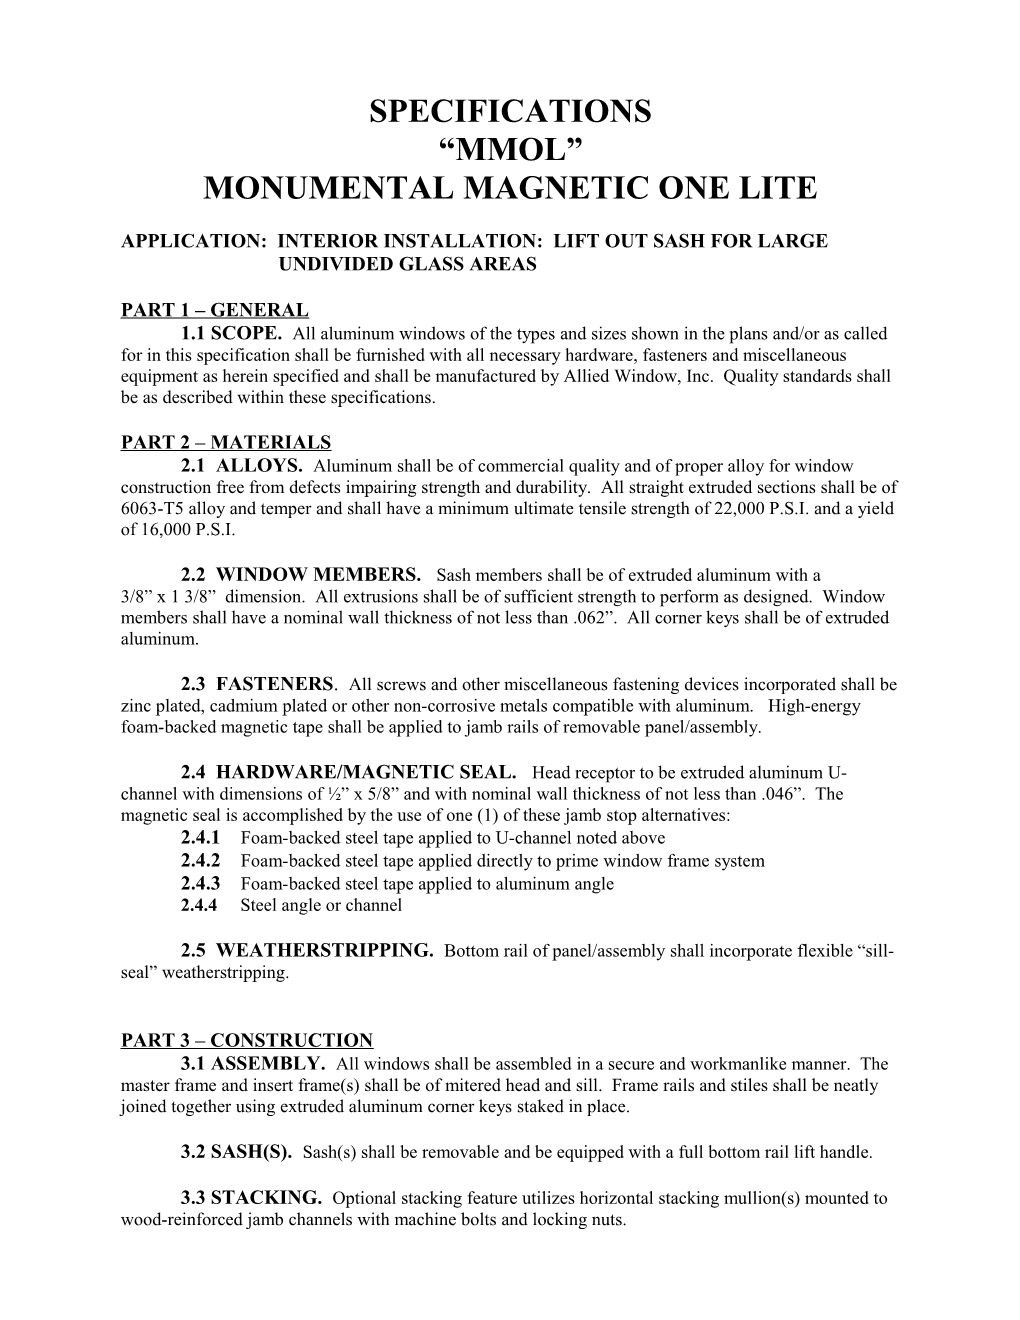 Monumental Magnetic One Lite